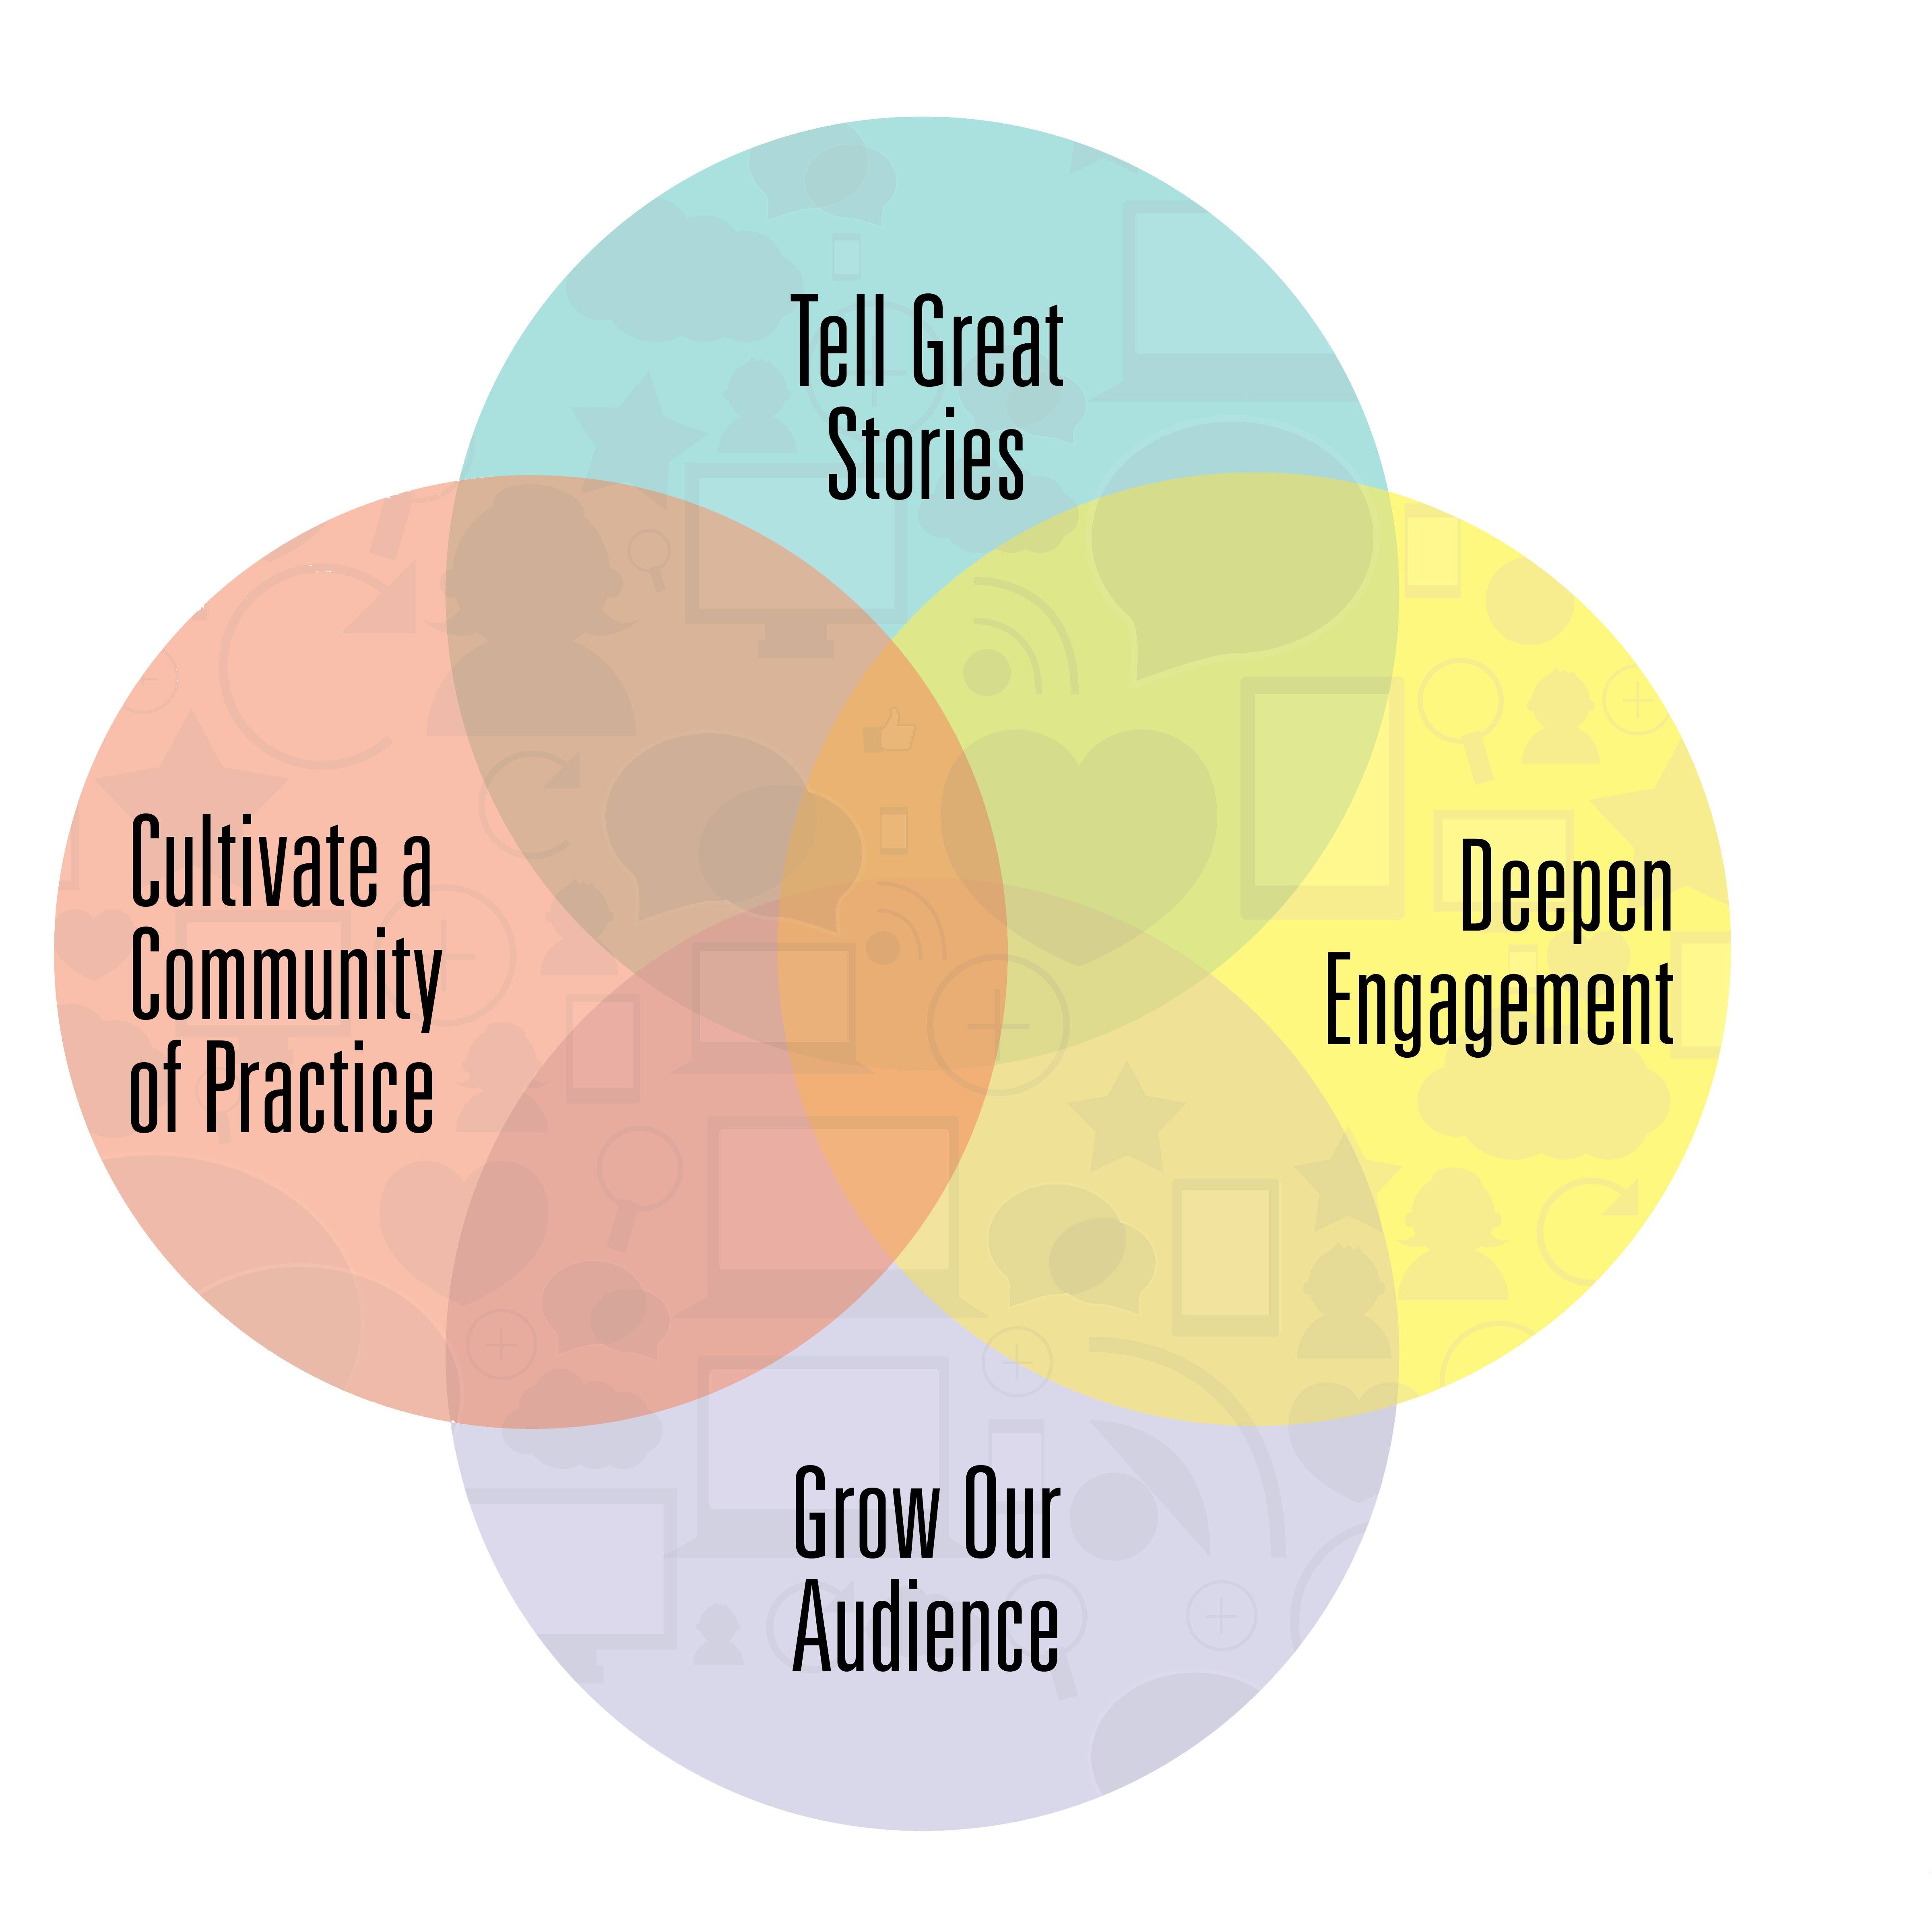 Venn Diagram - Tell Great Stories, Deepen Engagement, Grow Our Audience, and Cultivate a Community of Practice